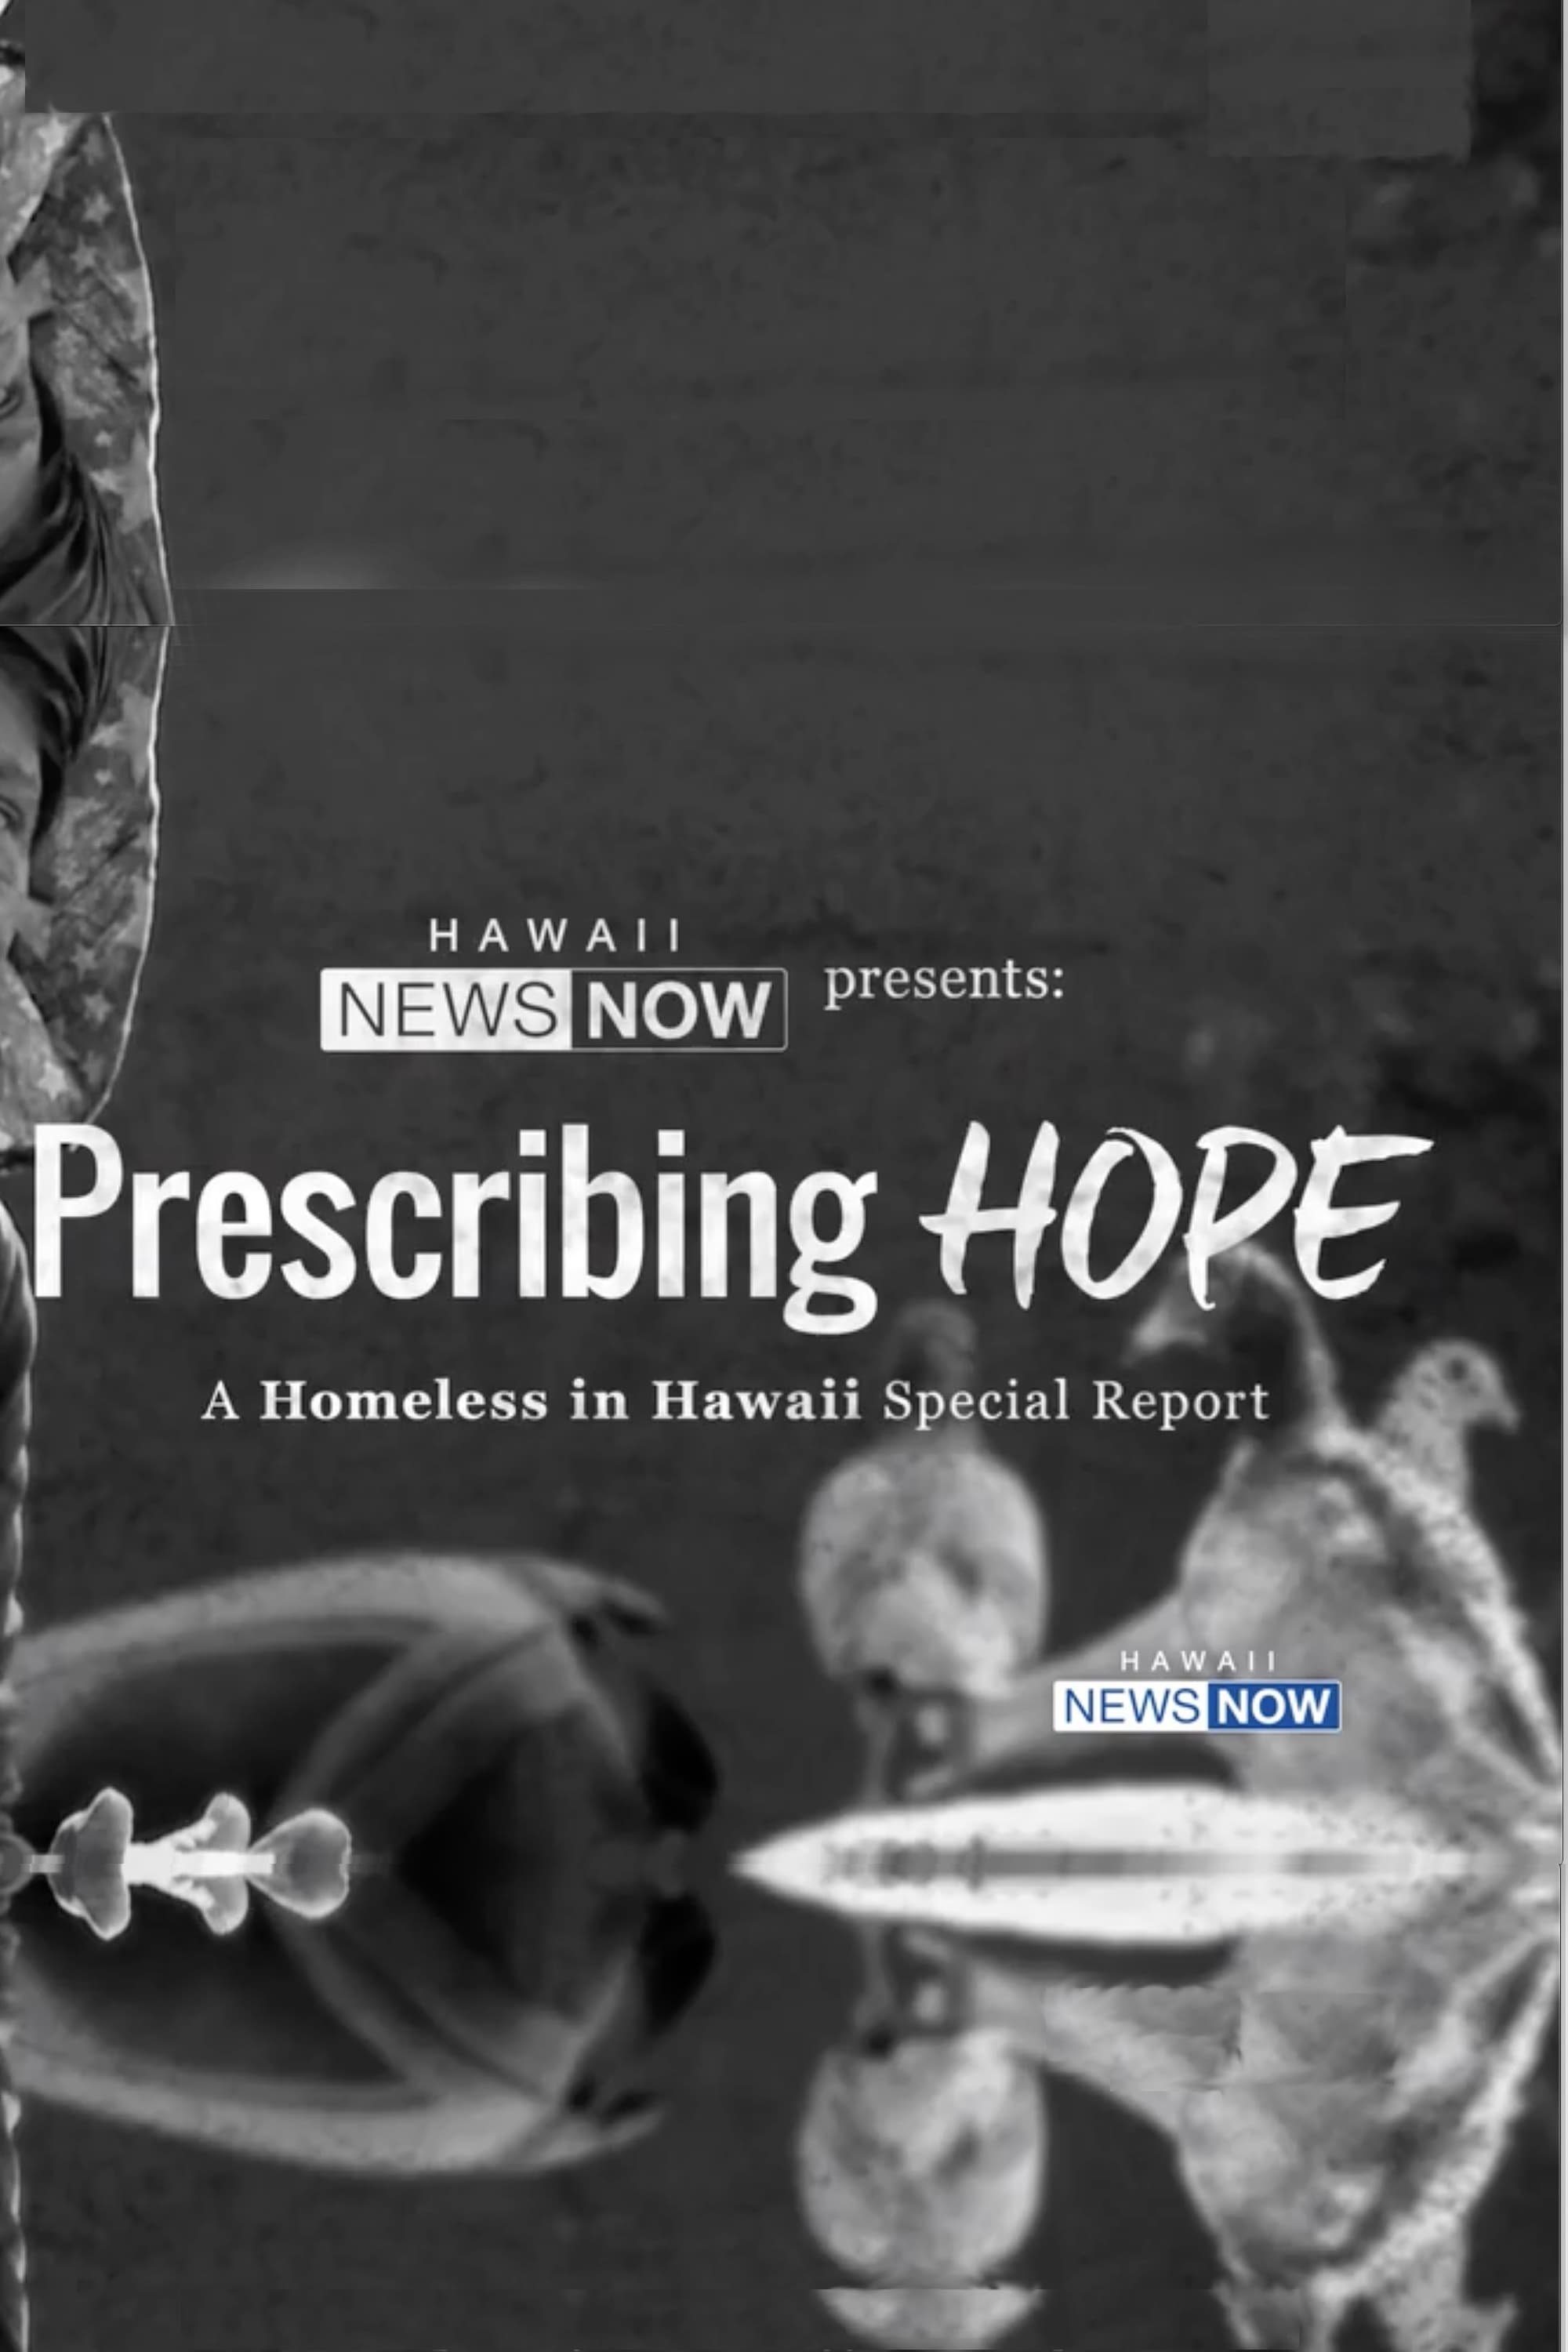 Prescribing Hope: A Homeless in Hawaii Special Report